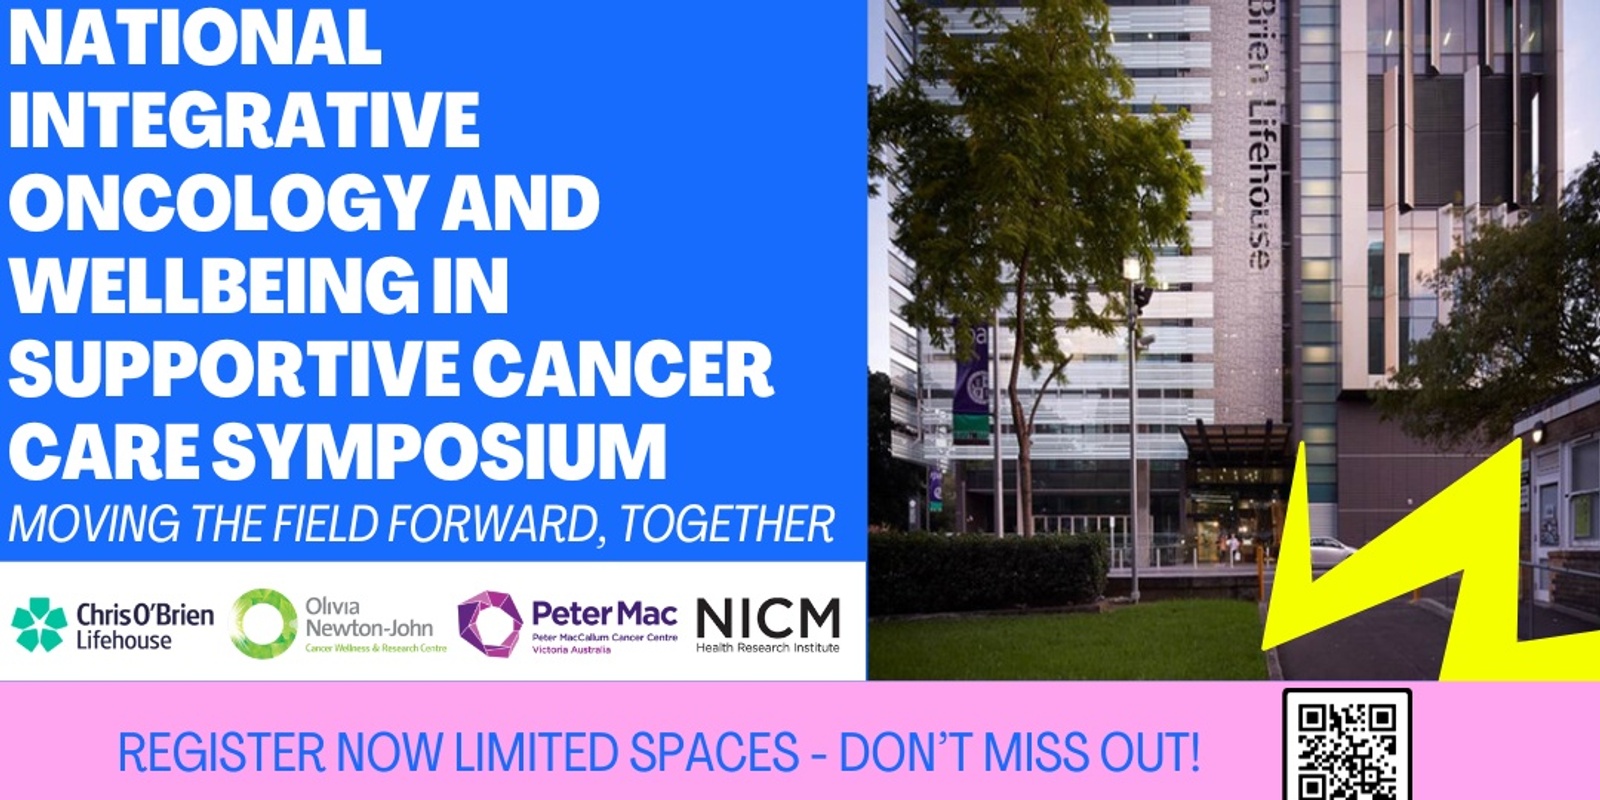 Banner image for National Integrative Oncology and Wellbeing in Supportive Cancer Care Symposium.    Moving the field forward, together.  